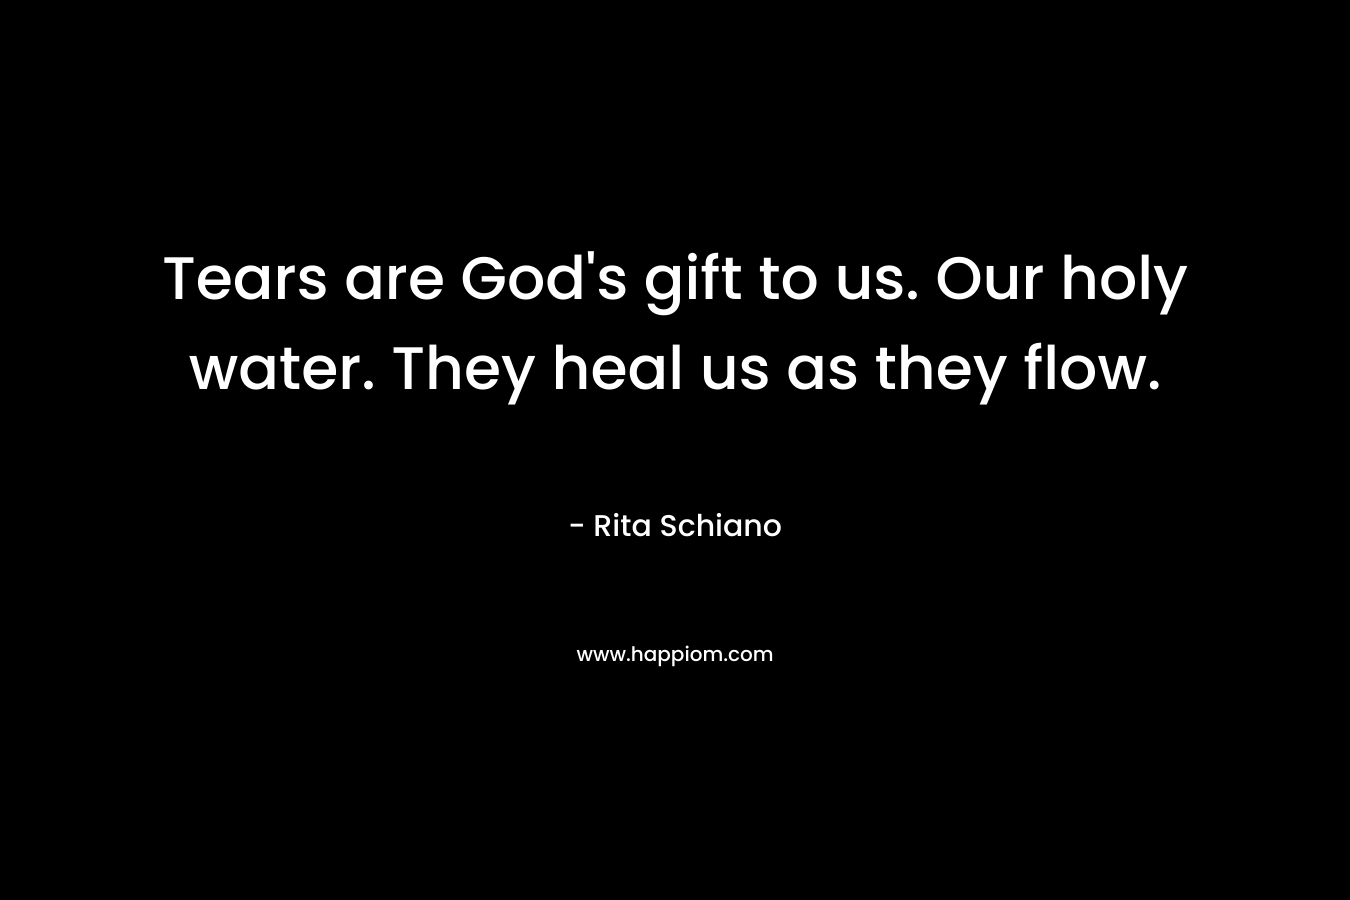 Tears are God's gift to us. Our holy water. They heal us as they flow.